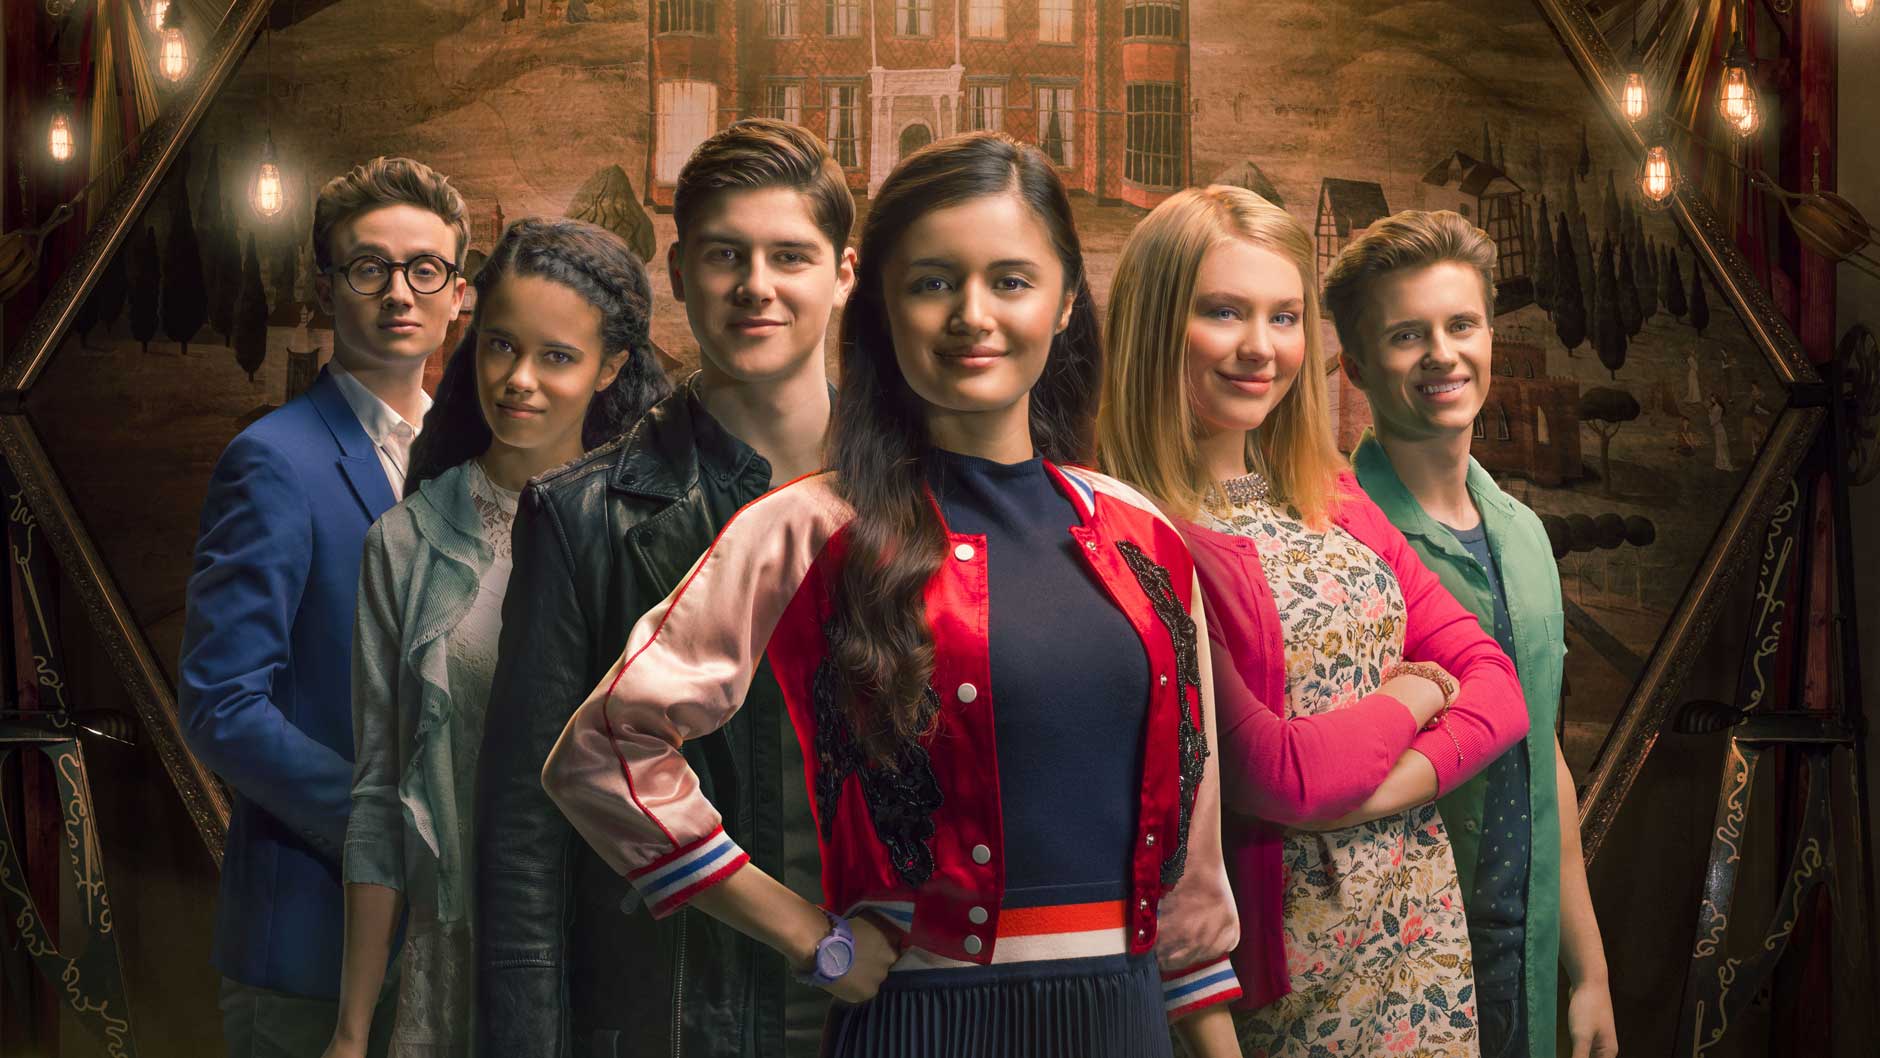 When Does The Evermoor Chronicles Season 2 Start? Release Date